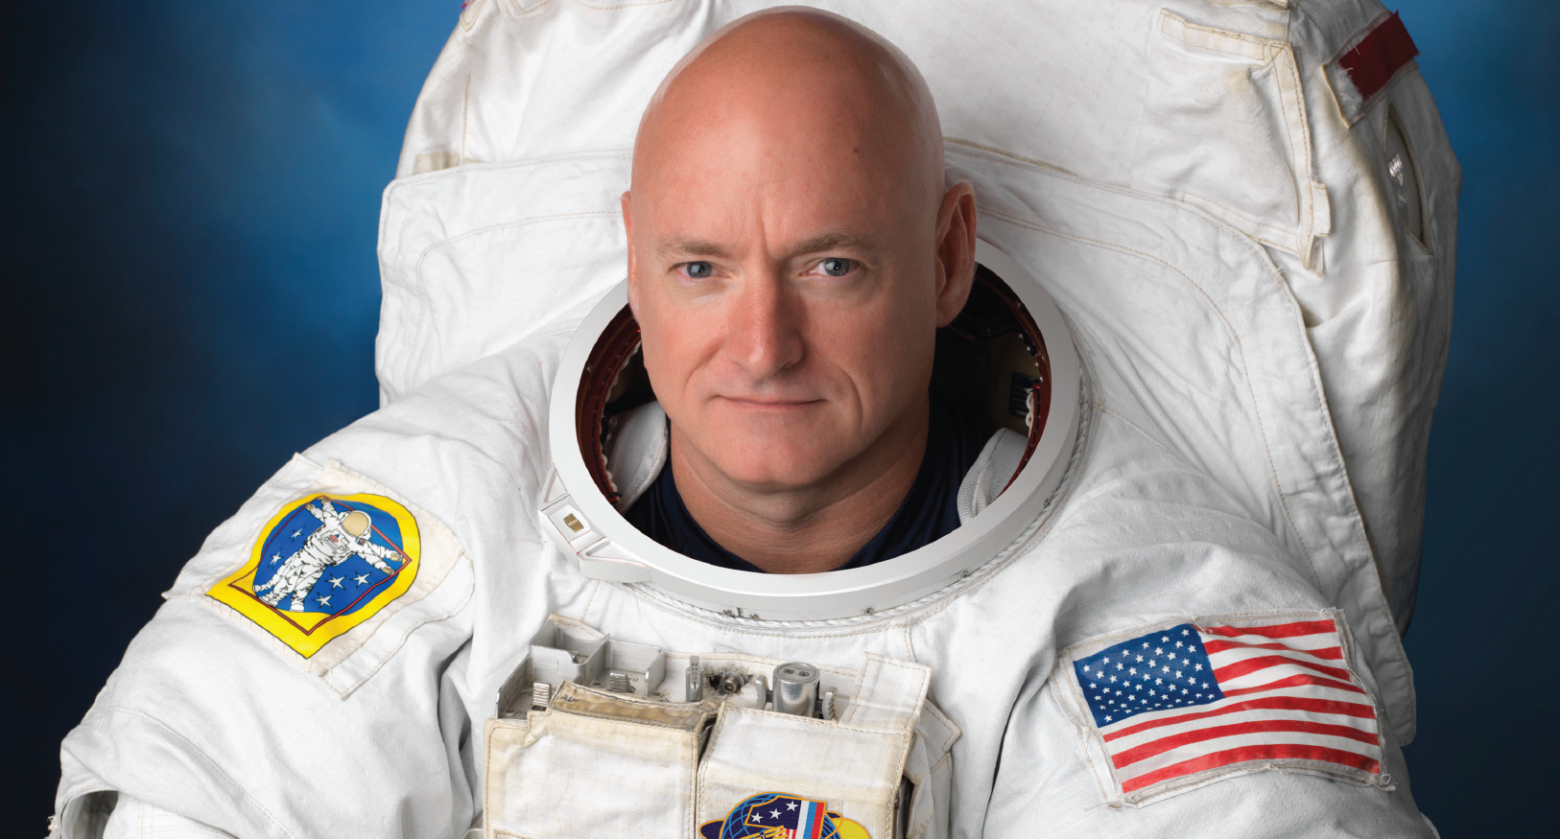 [image] Top 10 Life Lessons from Scott Kelly